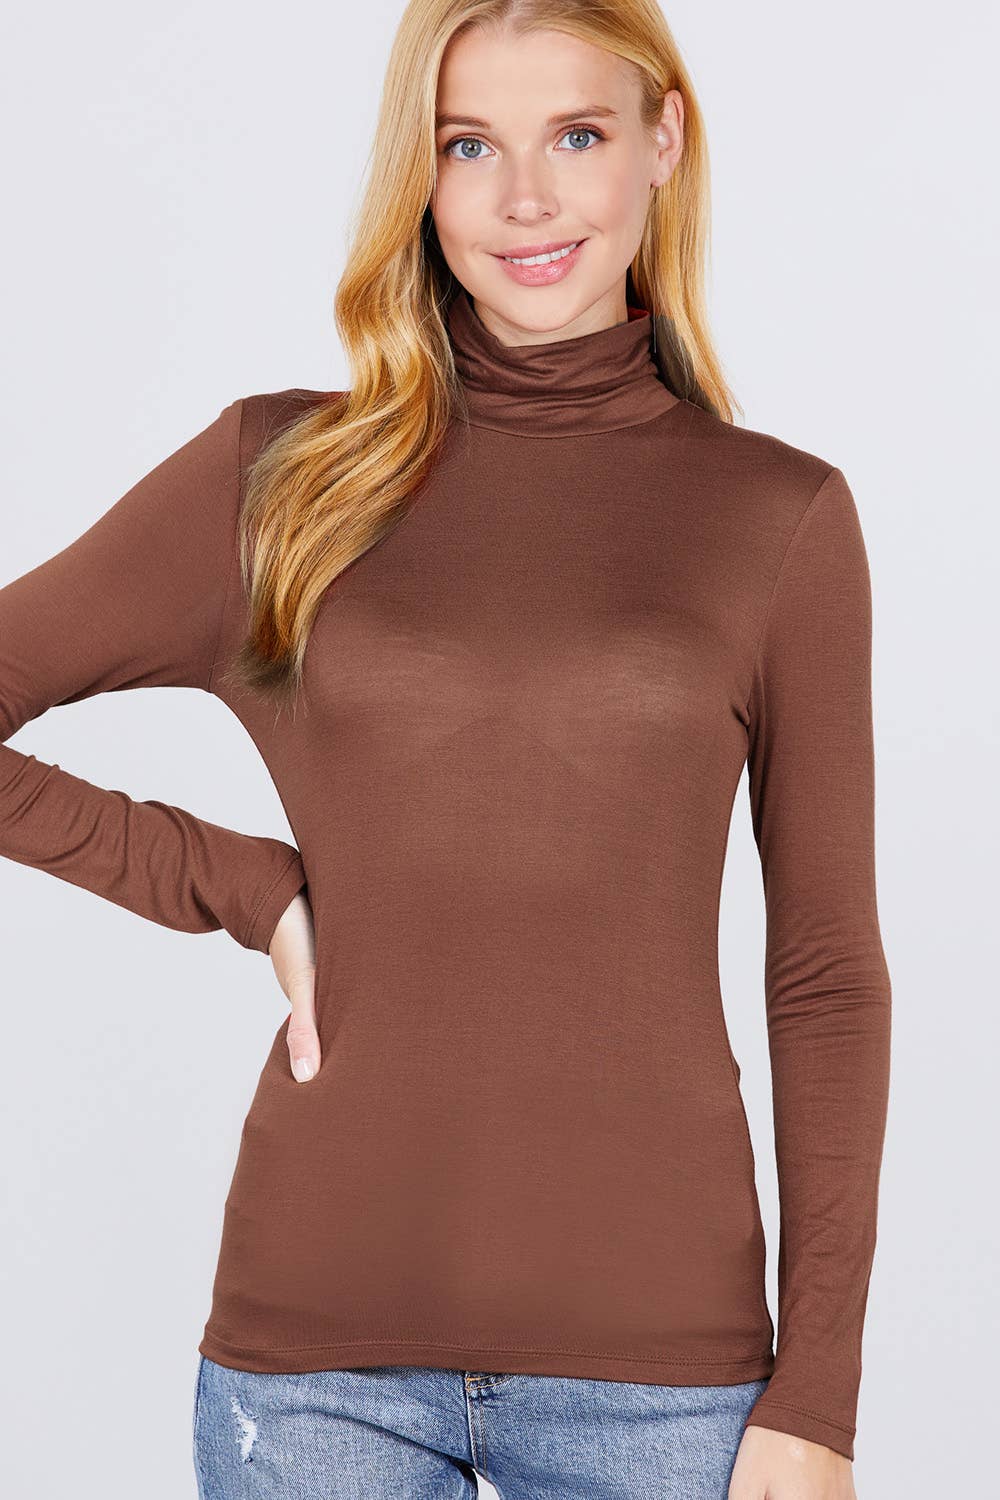 SI-11161 LONG SLEEVE TURTLE NECK FITTED RAYON JERSEY TOP: BLK-black-50455 / S